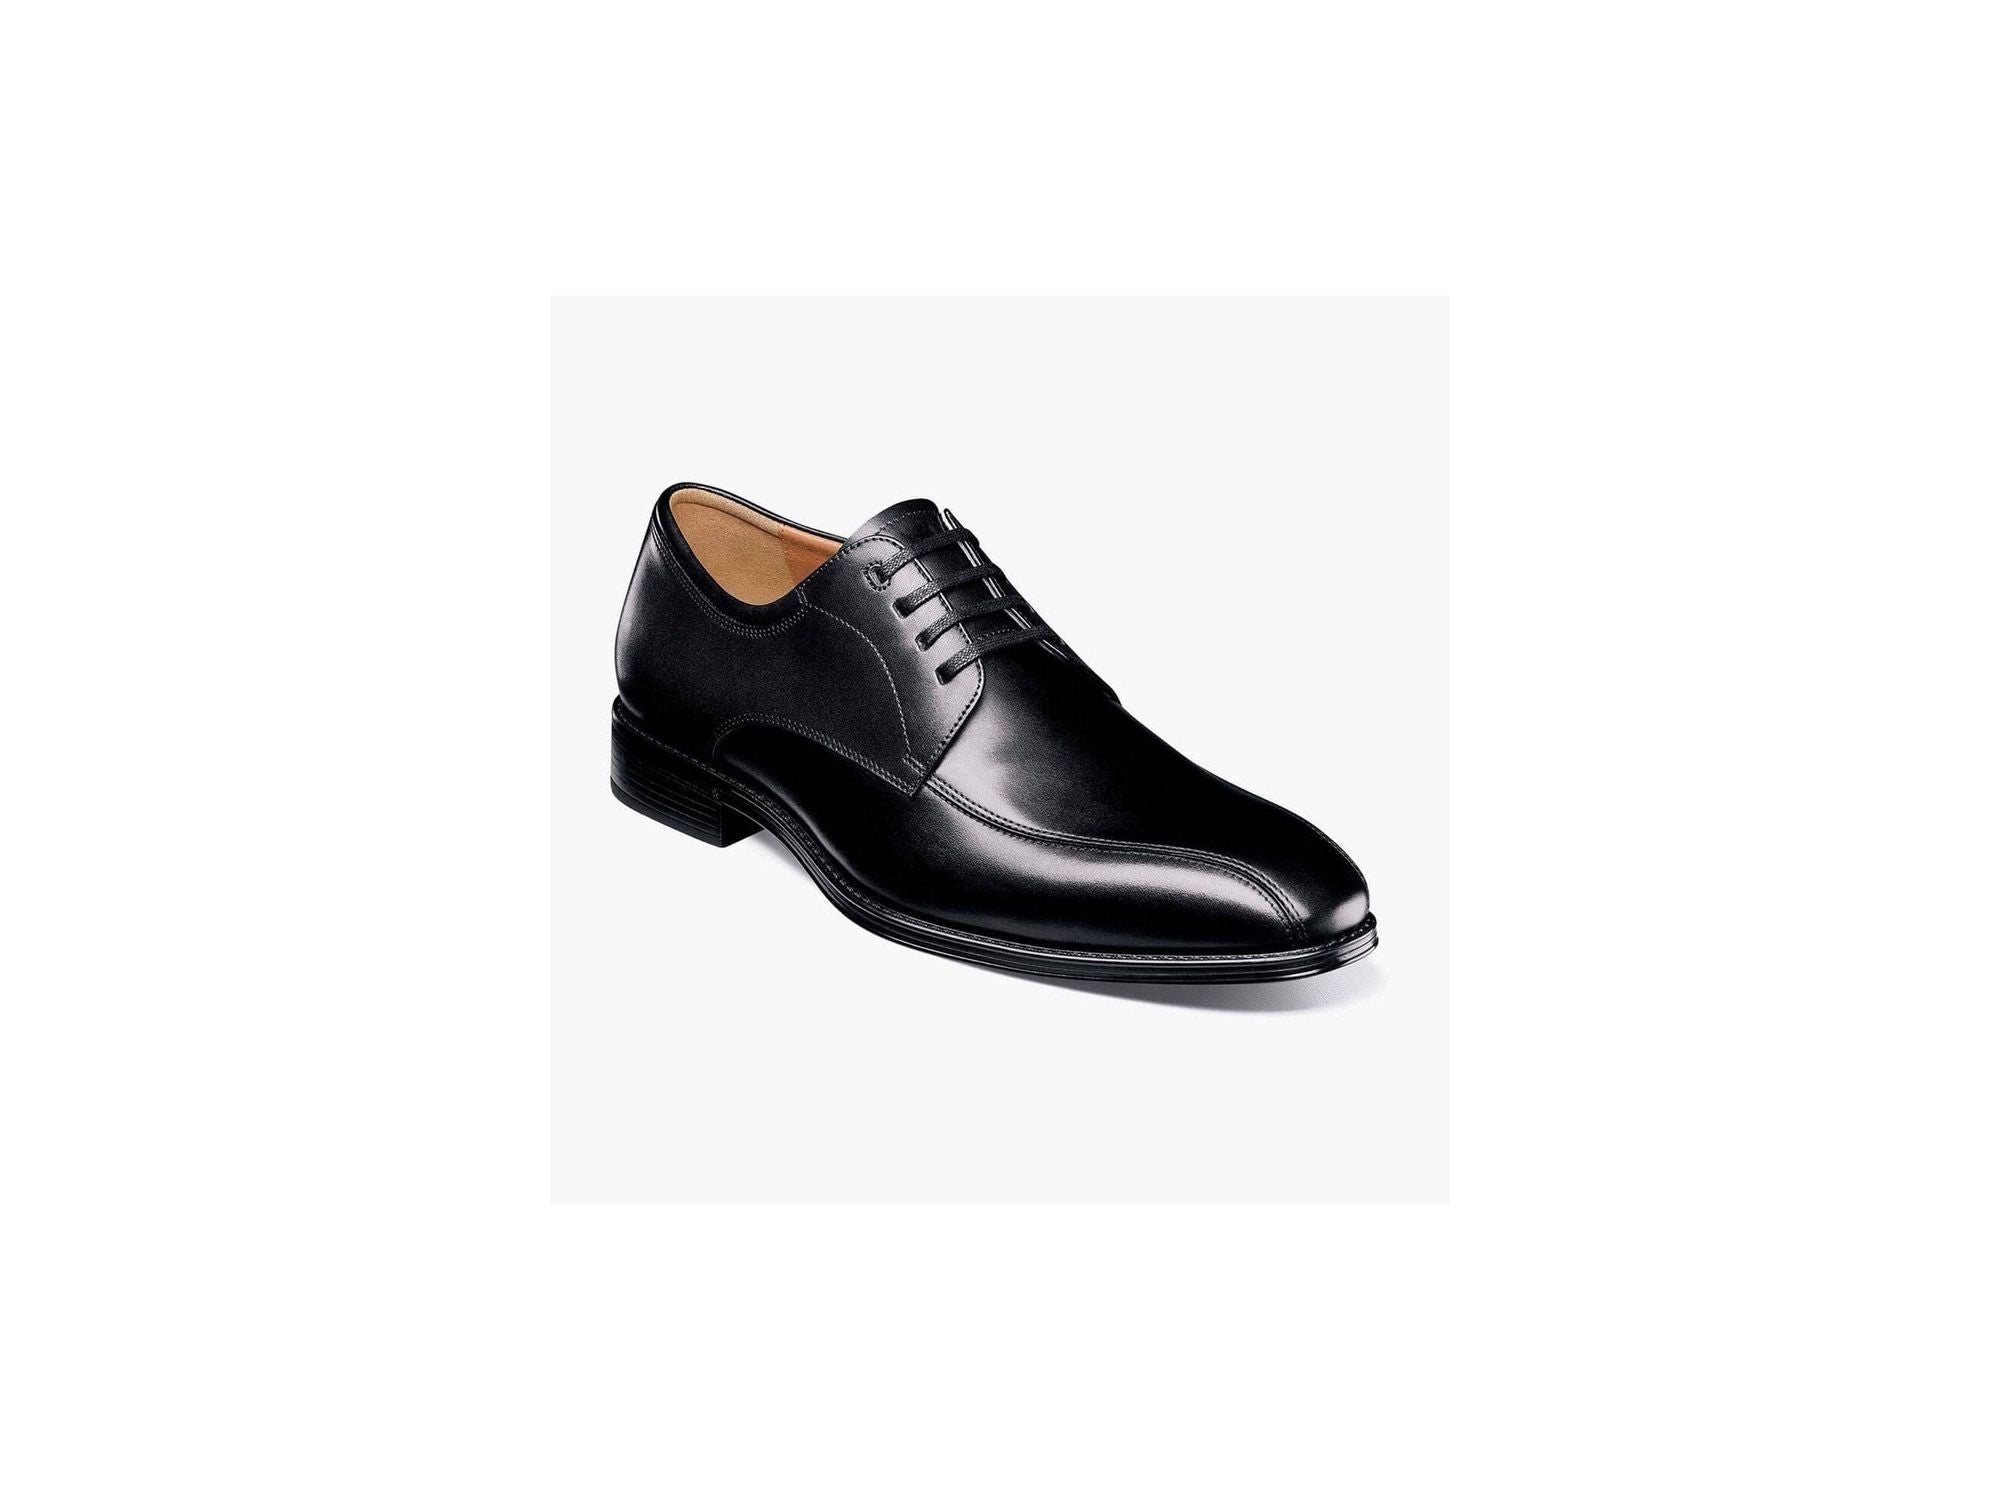 Florshiem Amelio Bike Toe Lace Up Oxrford Shoes In Black - Rainwater's Men's Clothing and Tuxedo Rental